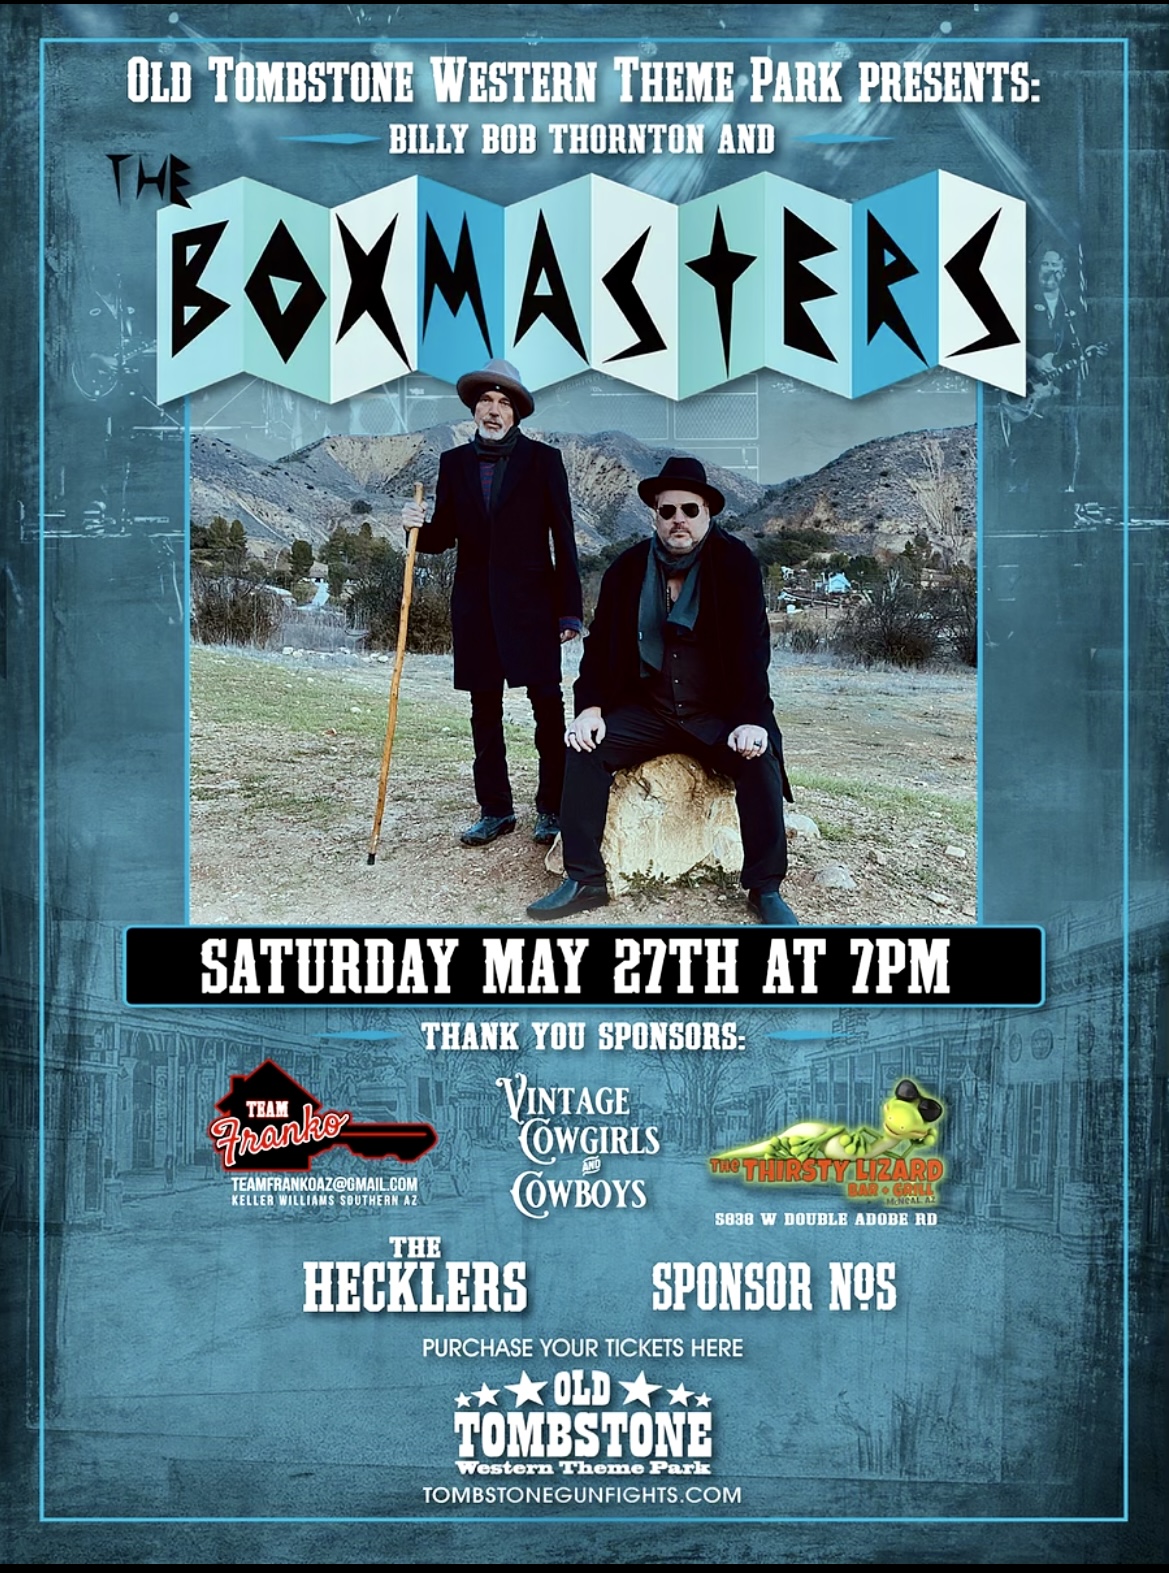 Billy Bob Thornton and the Boxmasters